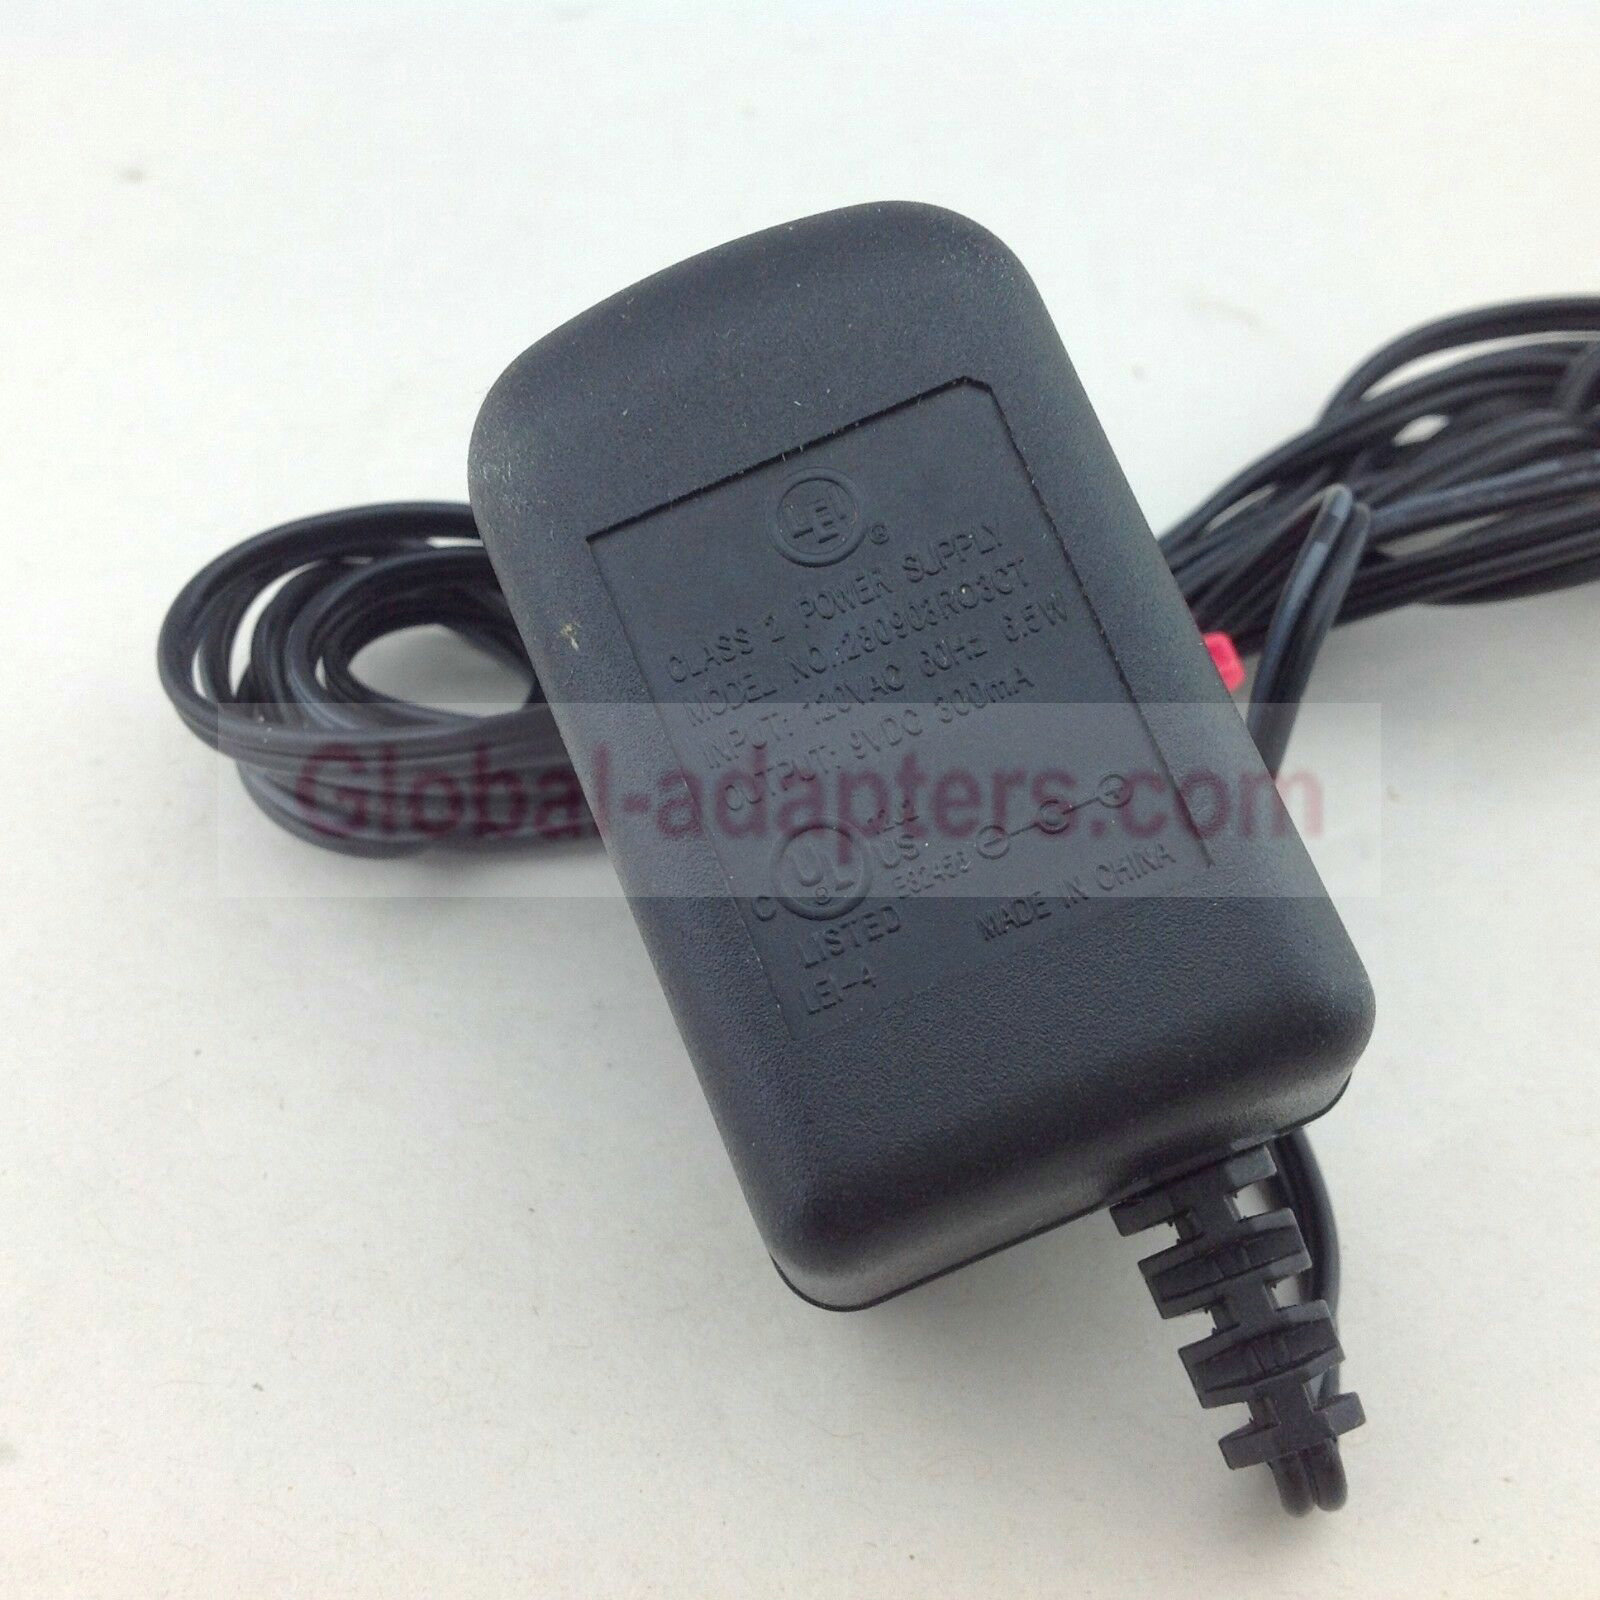 NEW 9V 300mA LEI 280903RO3CT Ac Adapter